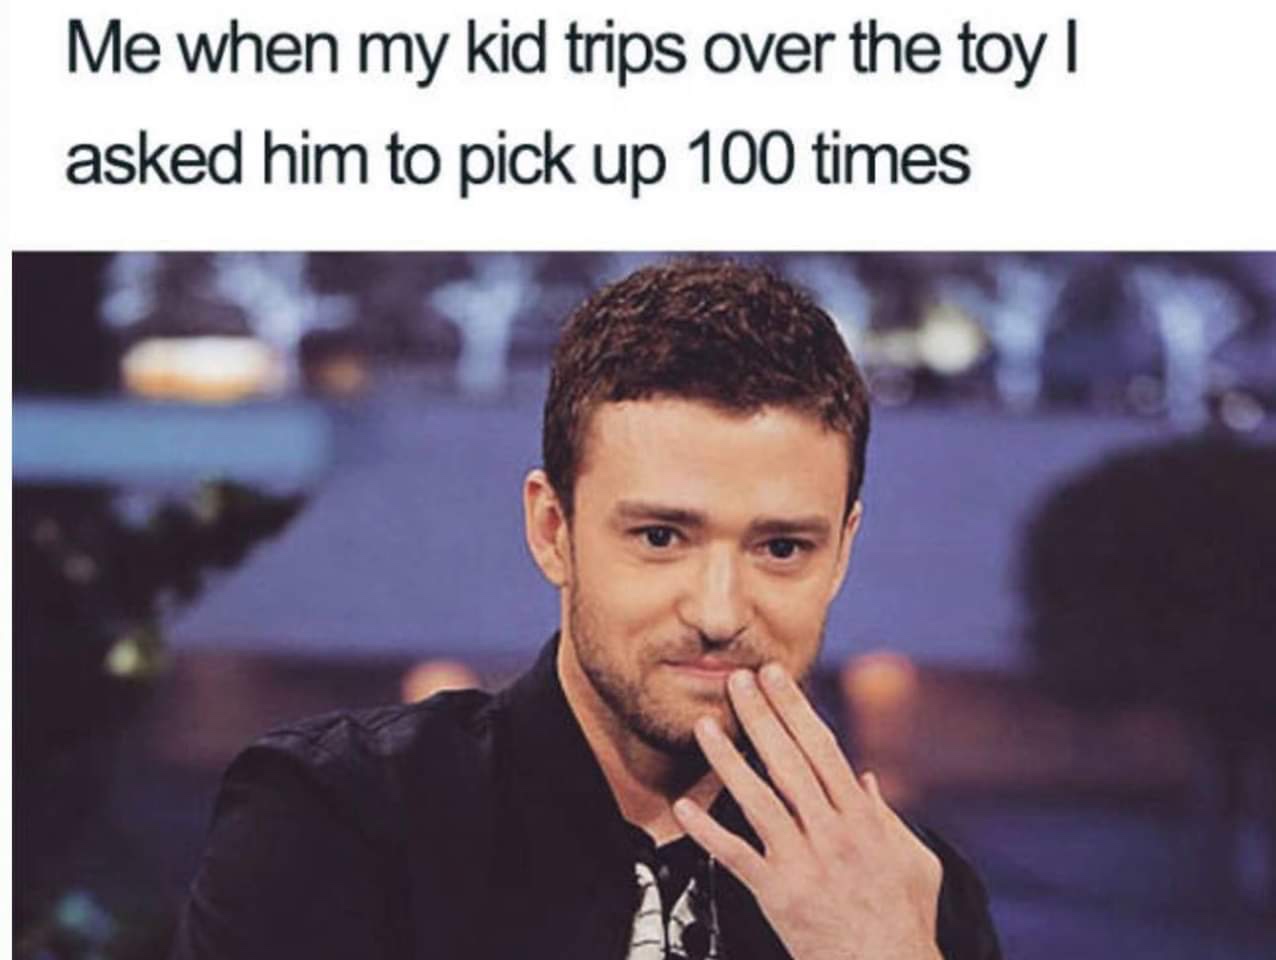 parenting memes - Me when my kid trips over the toy | asked him to pick up 100 times